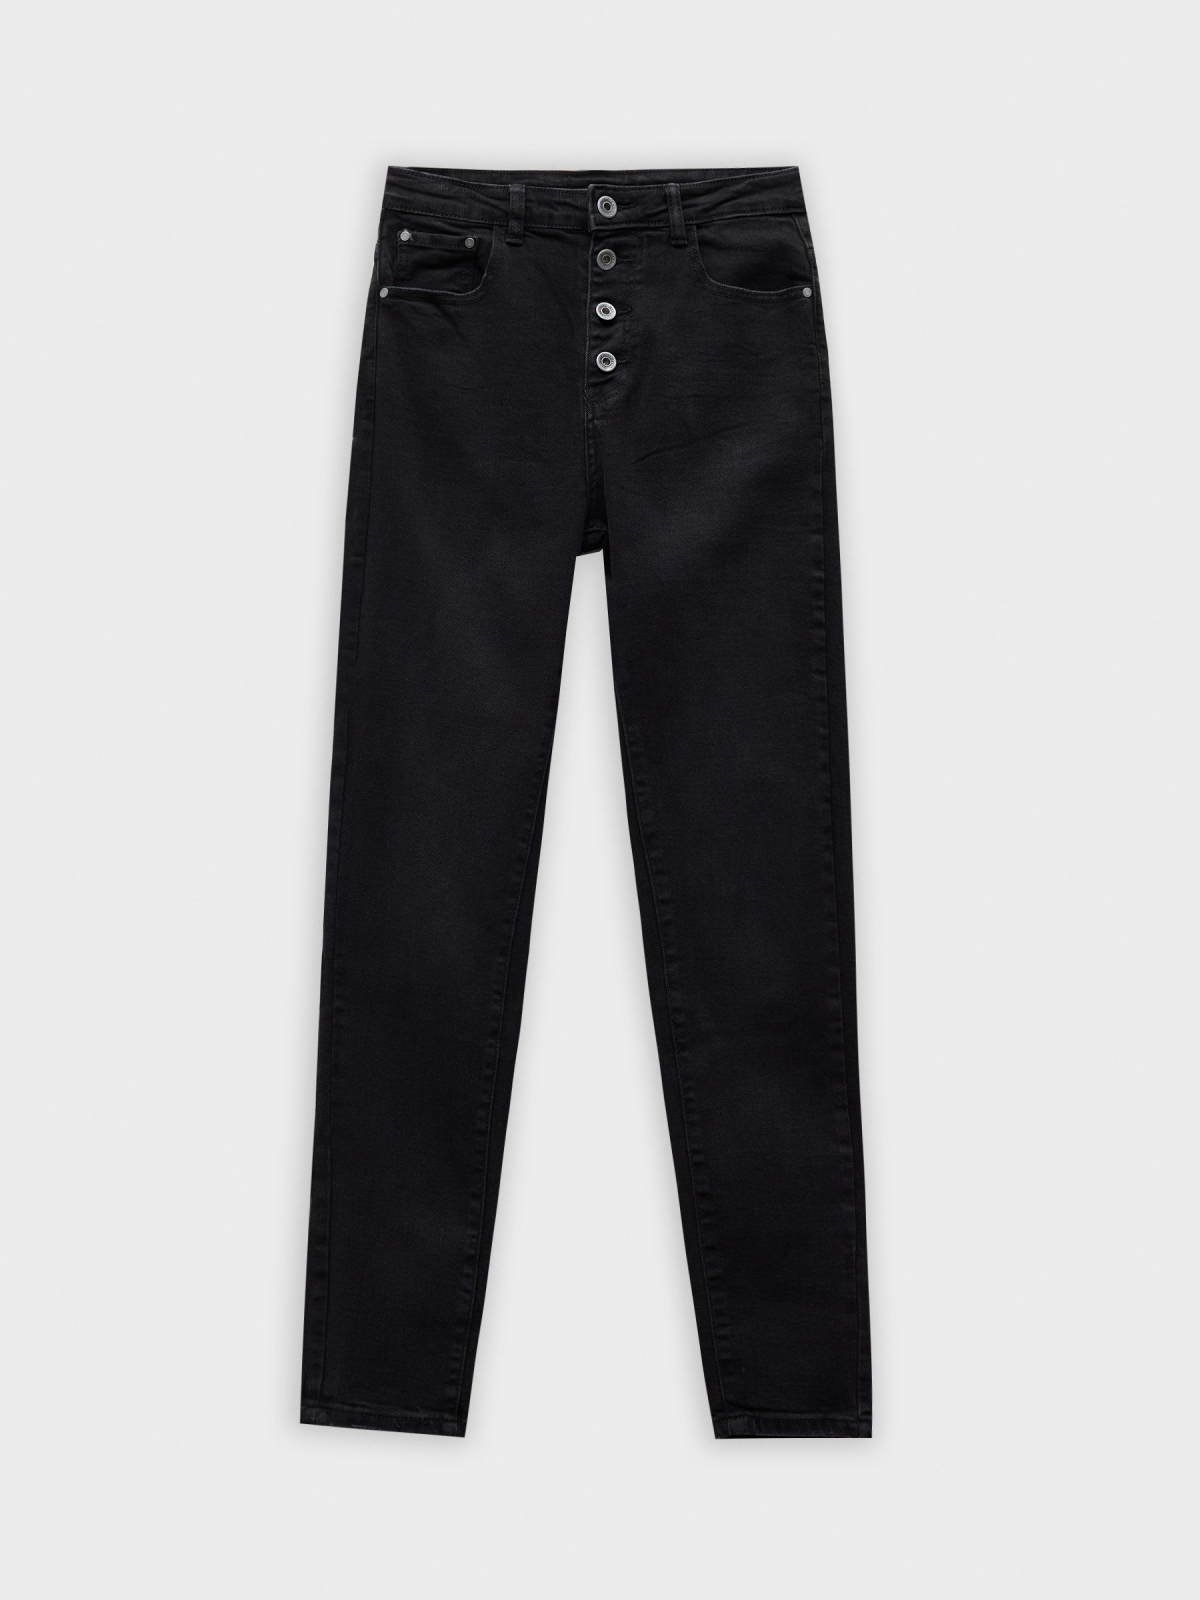  Skinny pants with buttons black